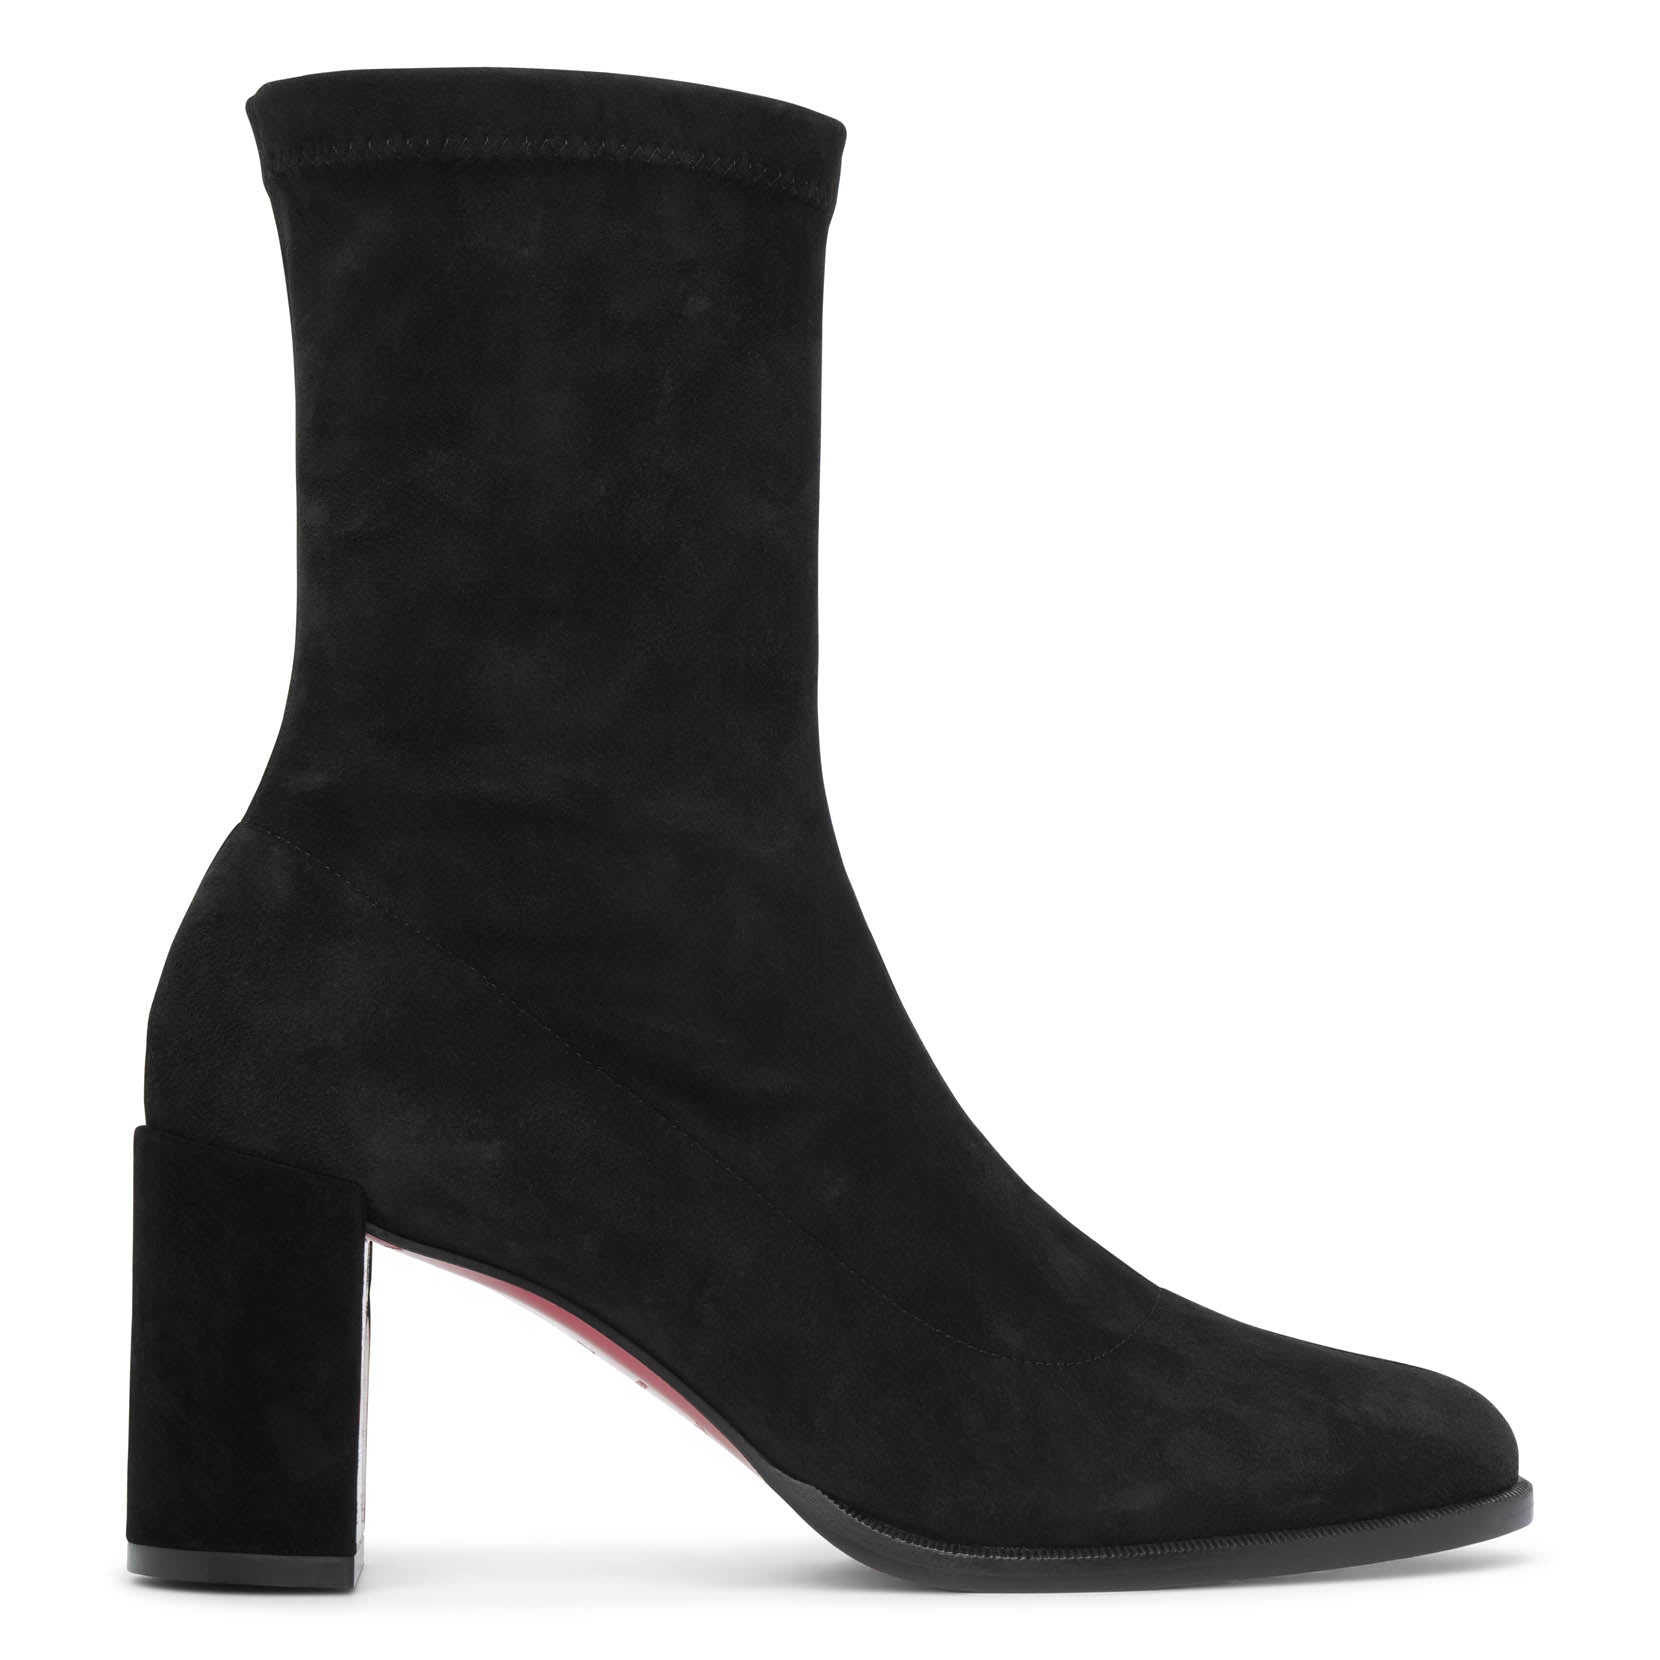 CHRISTIAN LOUBOUTIN STRETCHADOXA 70 BLACK SUEDE ANKLE BOOTS